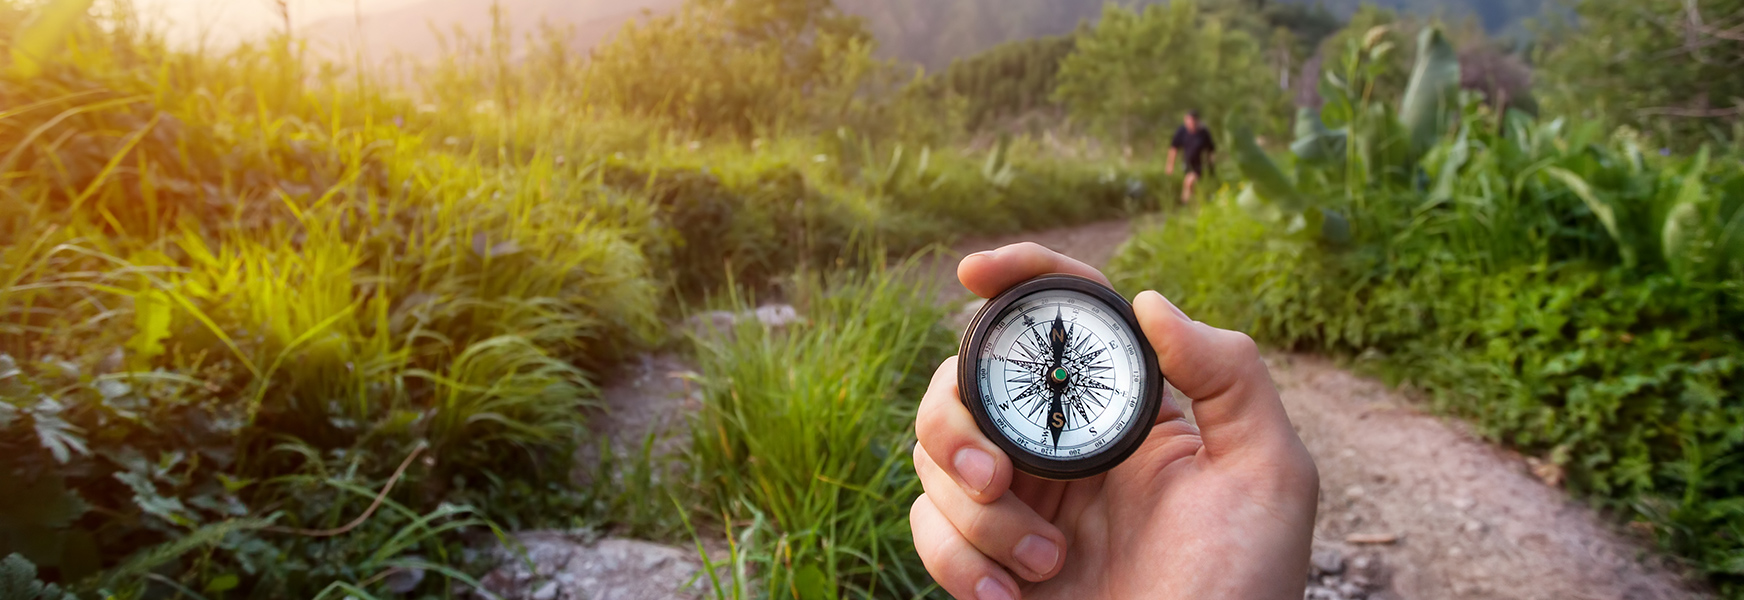 Hand holding a compass with out of focus mountains, tropical vegetation, and hiking partner in background